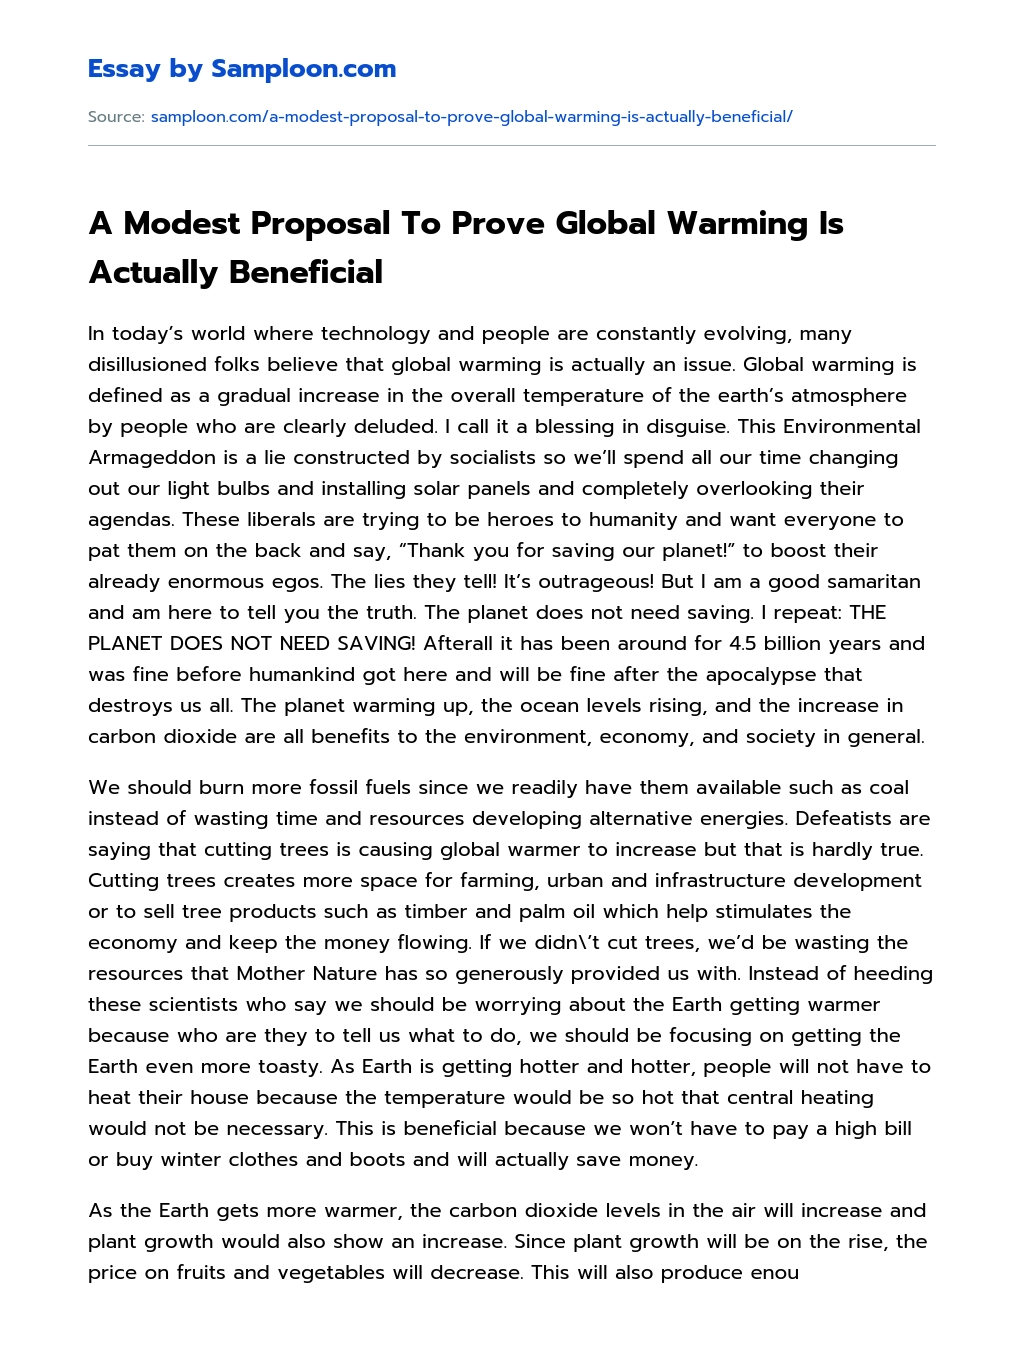 A Modest Proposal To Prove Global Warming Is Actually Beneficial essay